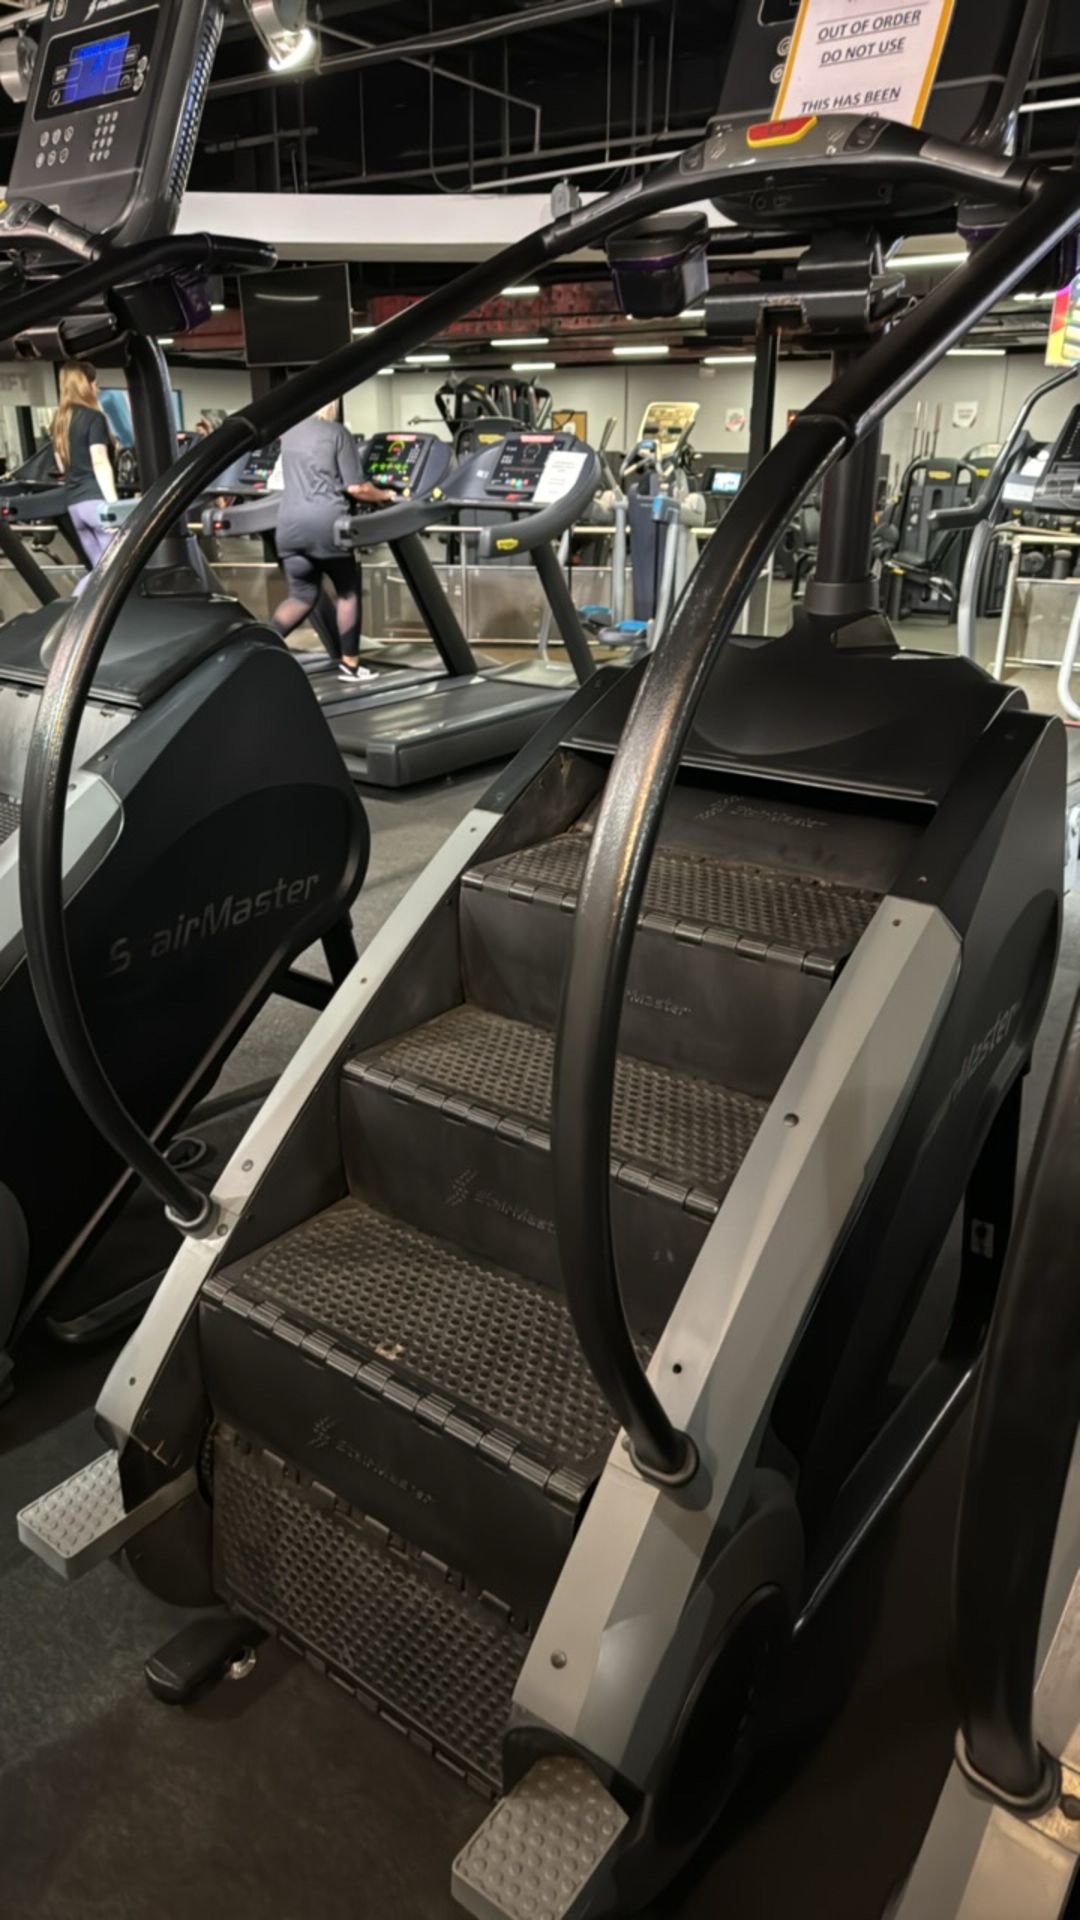 Stairmaster - Image 5 of 5